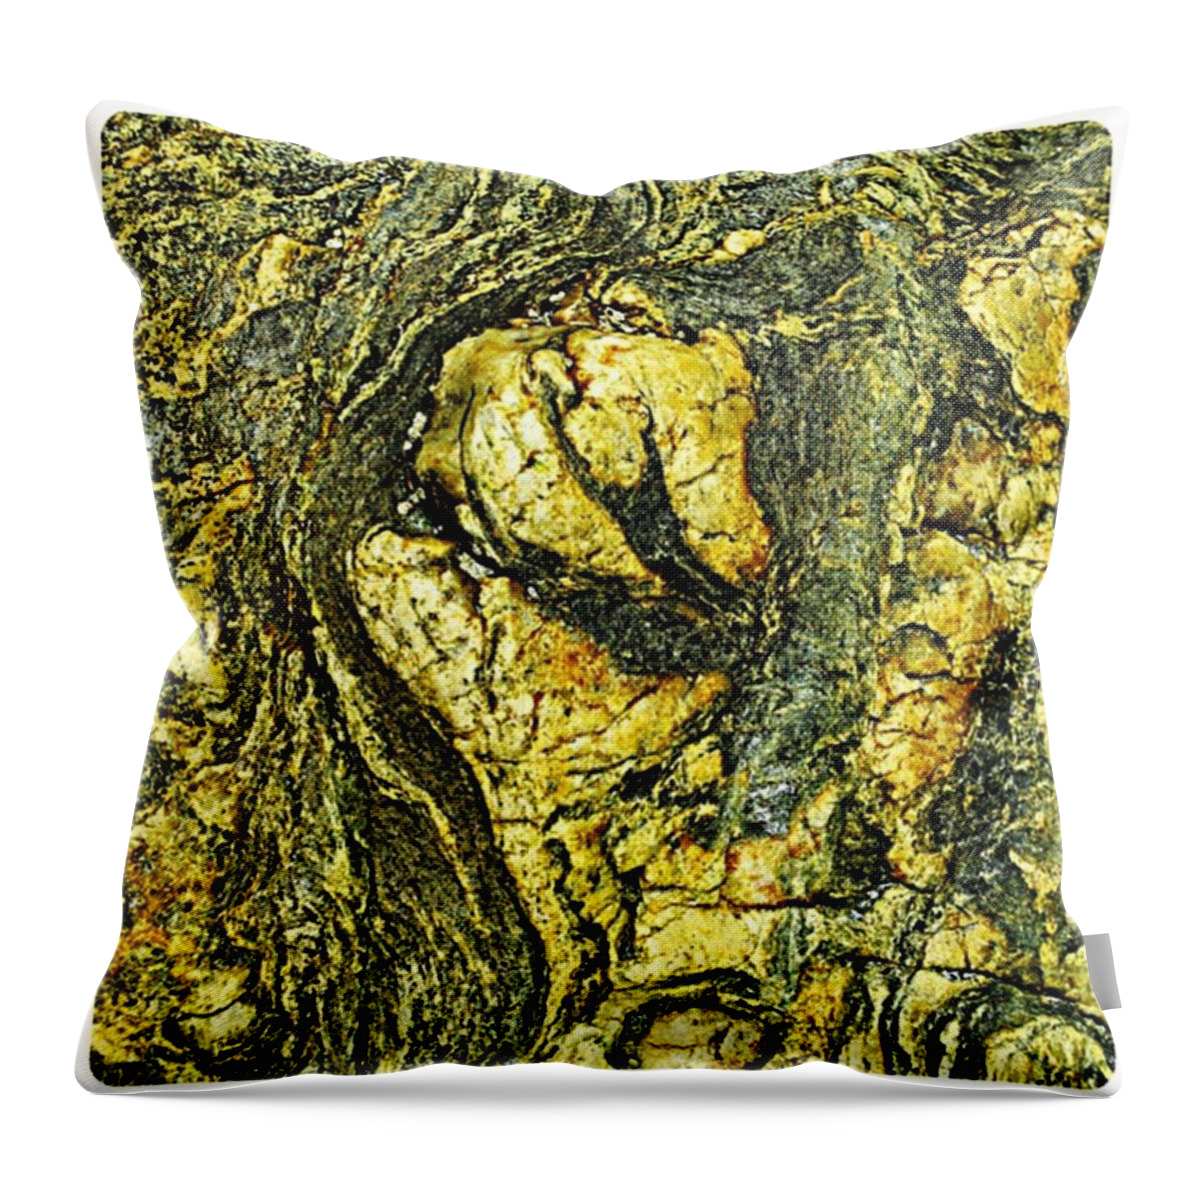 Stones Throw Pillow featuring the photograph Frozen In Stone by Hans Fotoboek